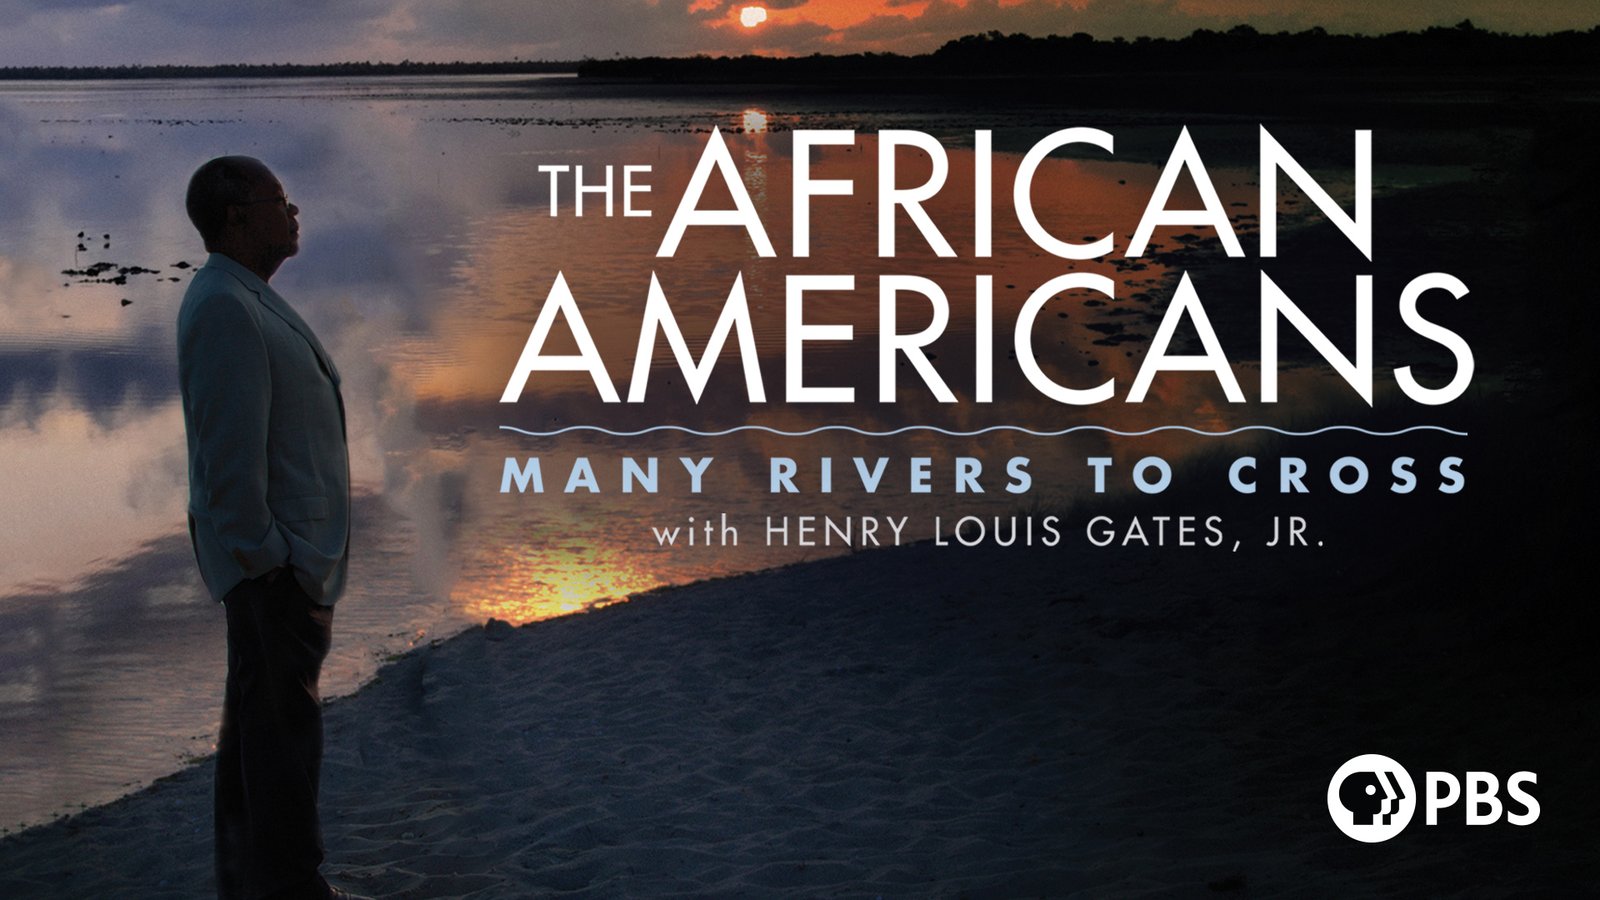 The African Americans - Many Rivers to Cross